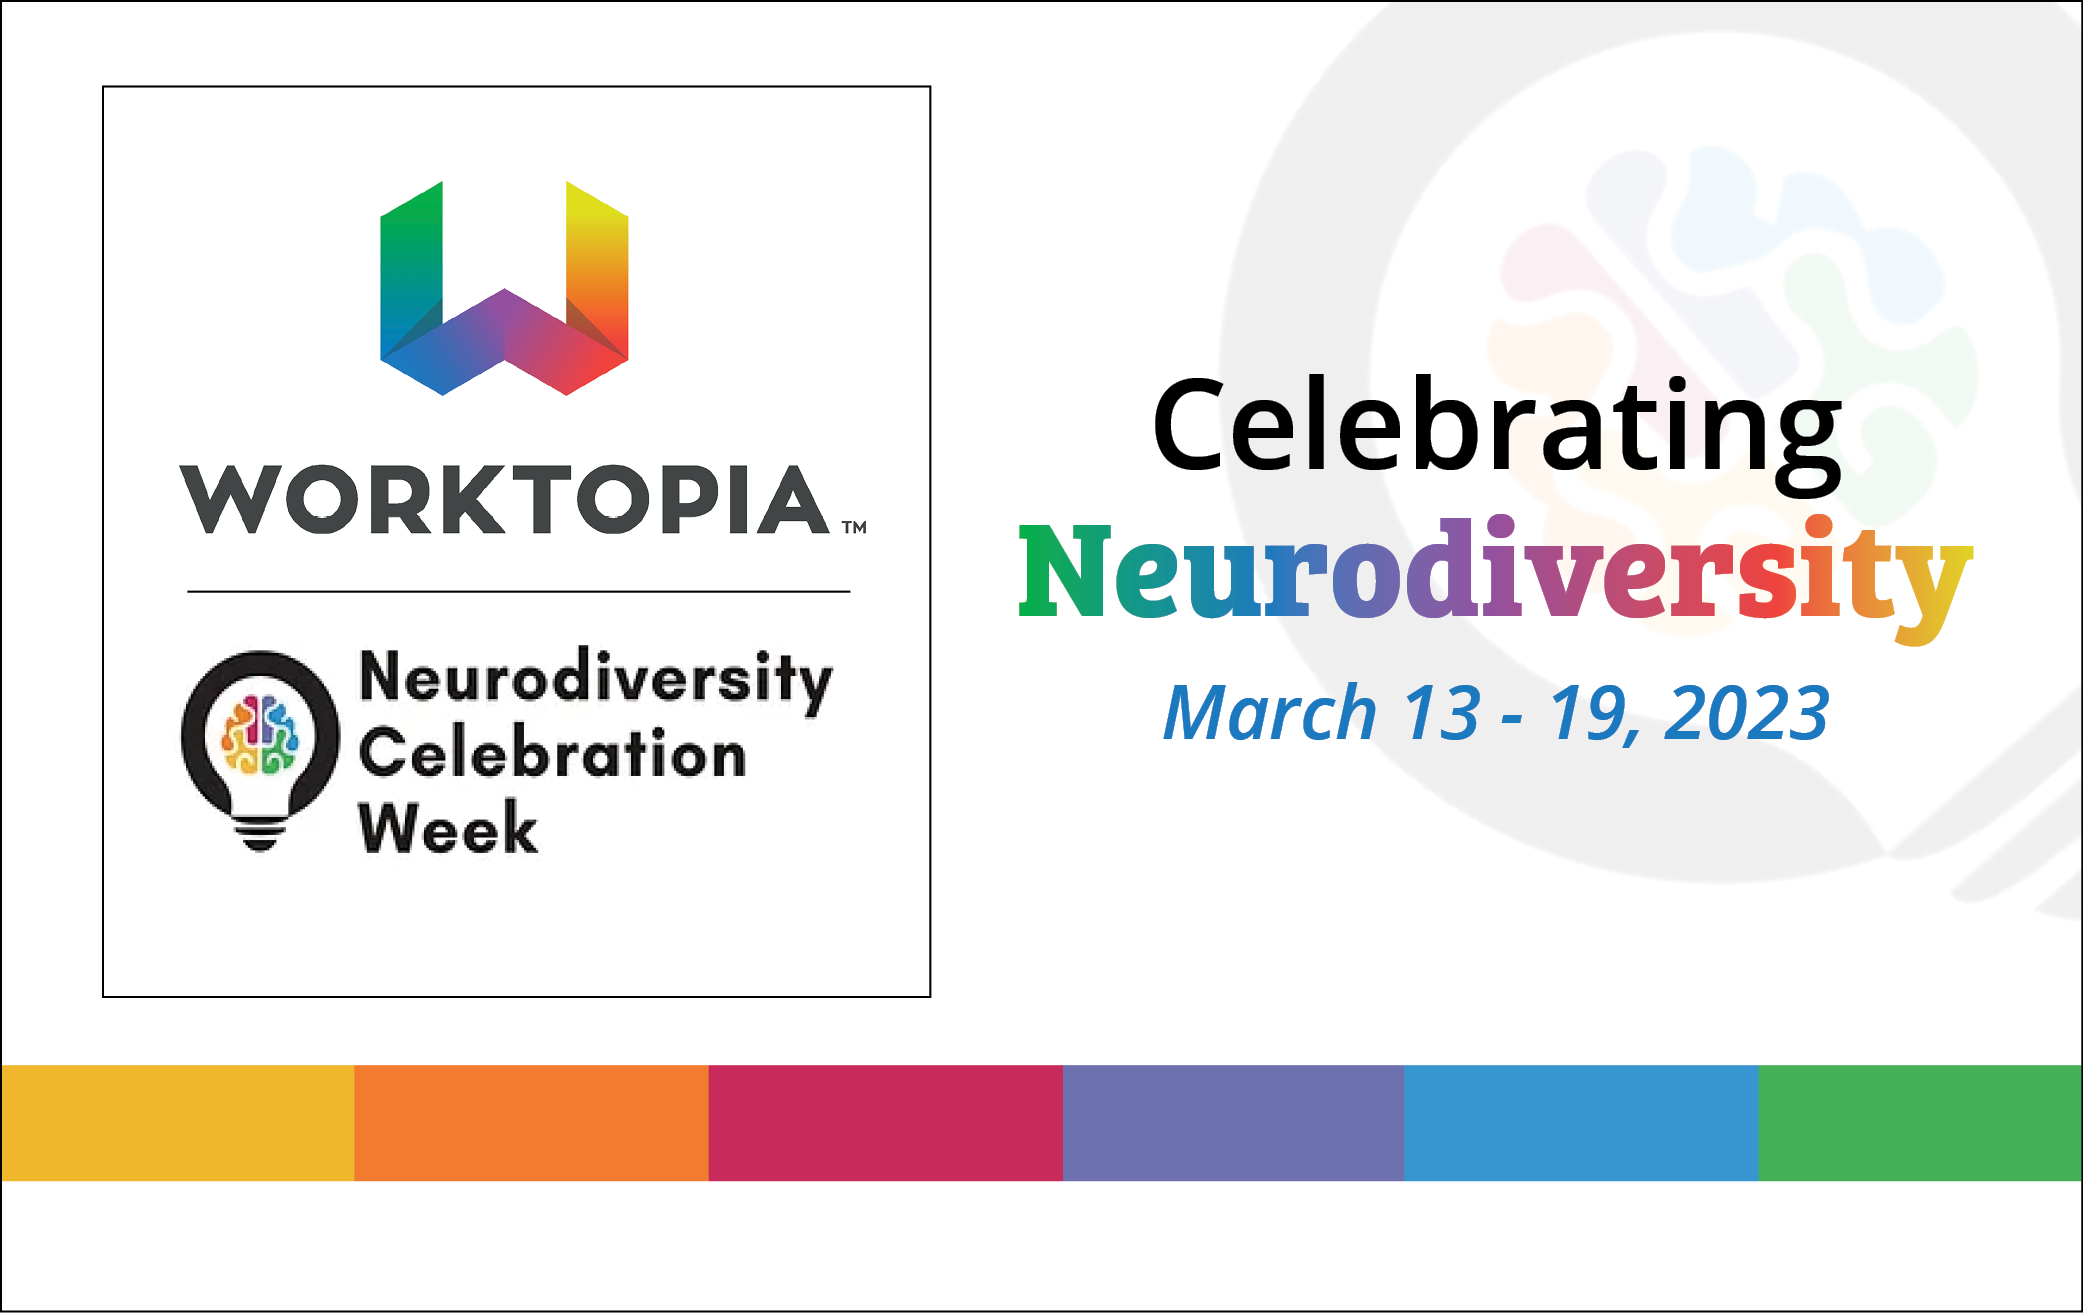 On a white background, in the left hand side of the image is the Worktopia logo, followed by the Neurodiversity Celebration Week logo in the bottom. To the right of the image reads, "Celebrating Neurodiversity, March 13-19, 2023."